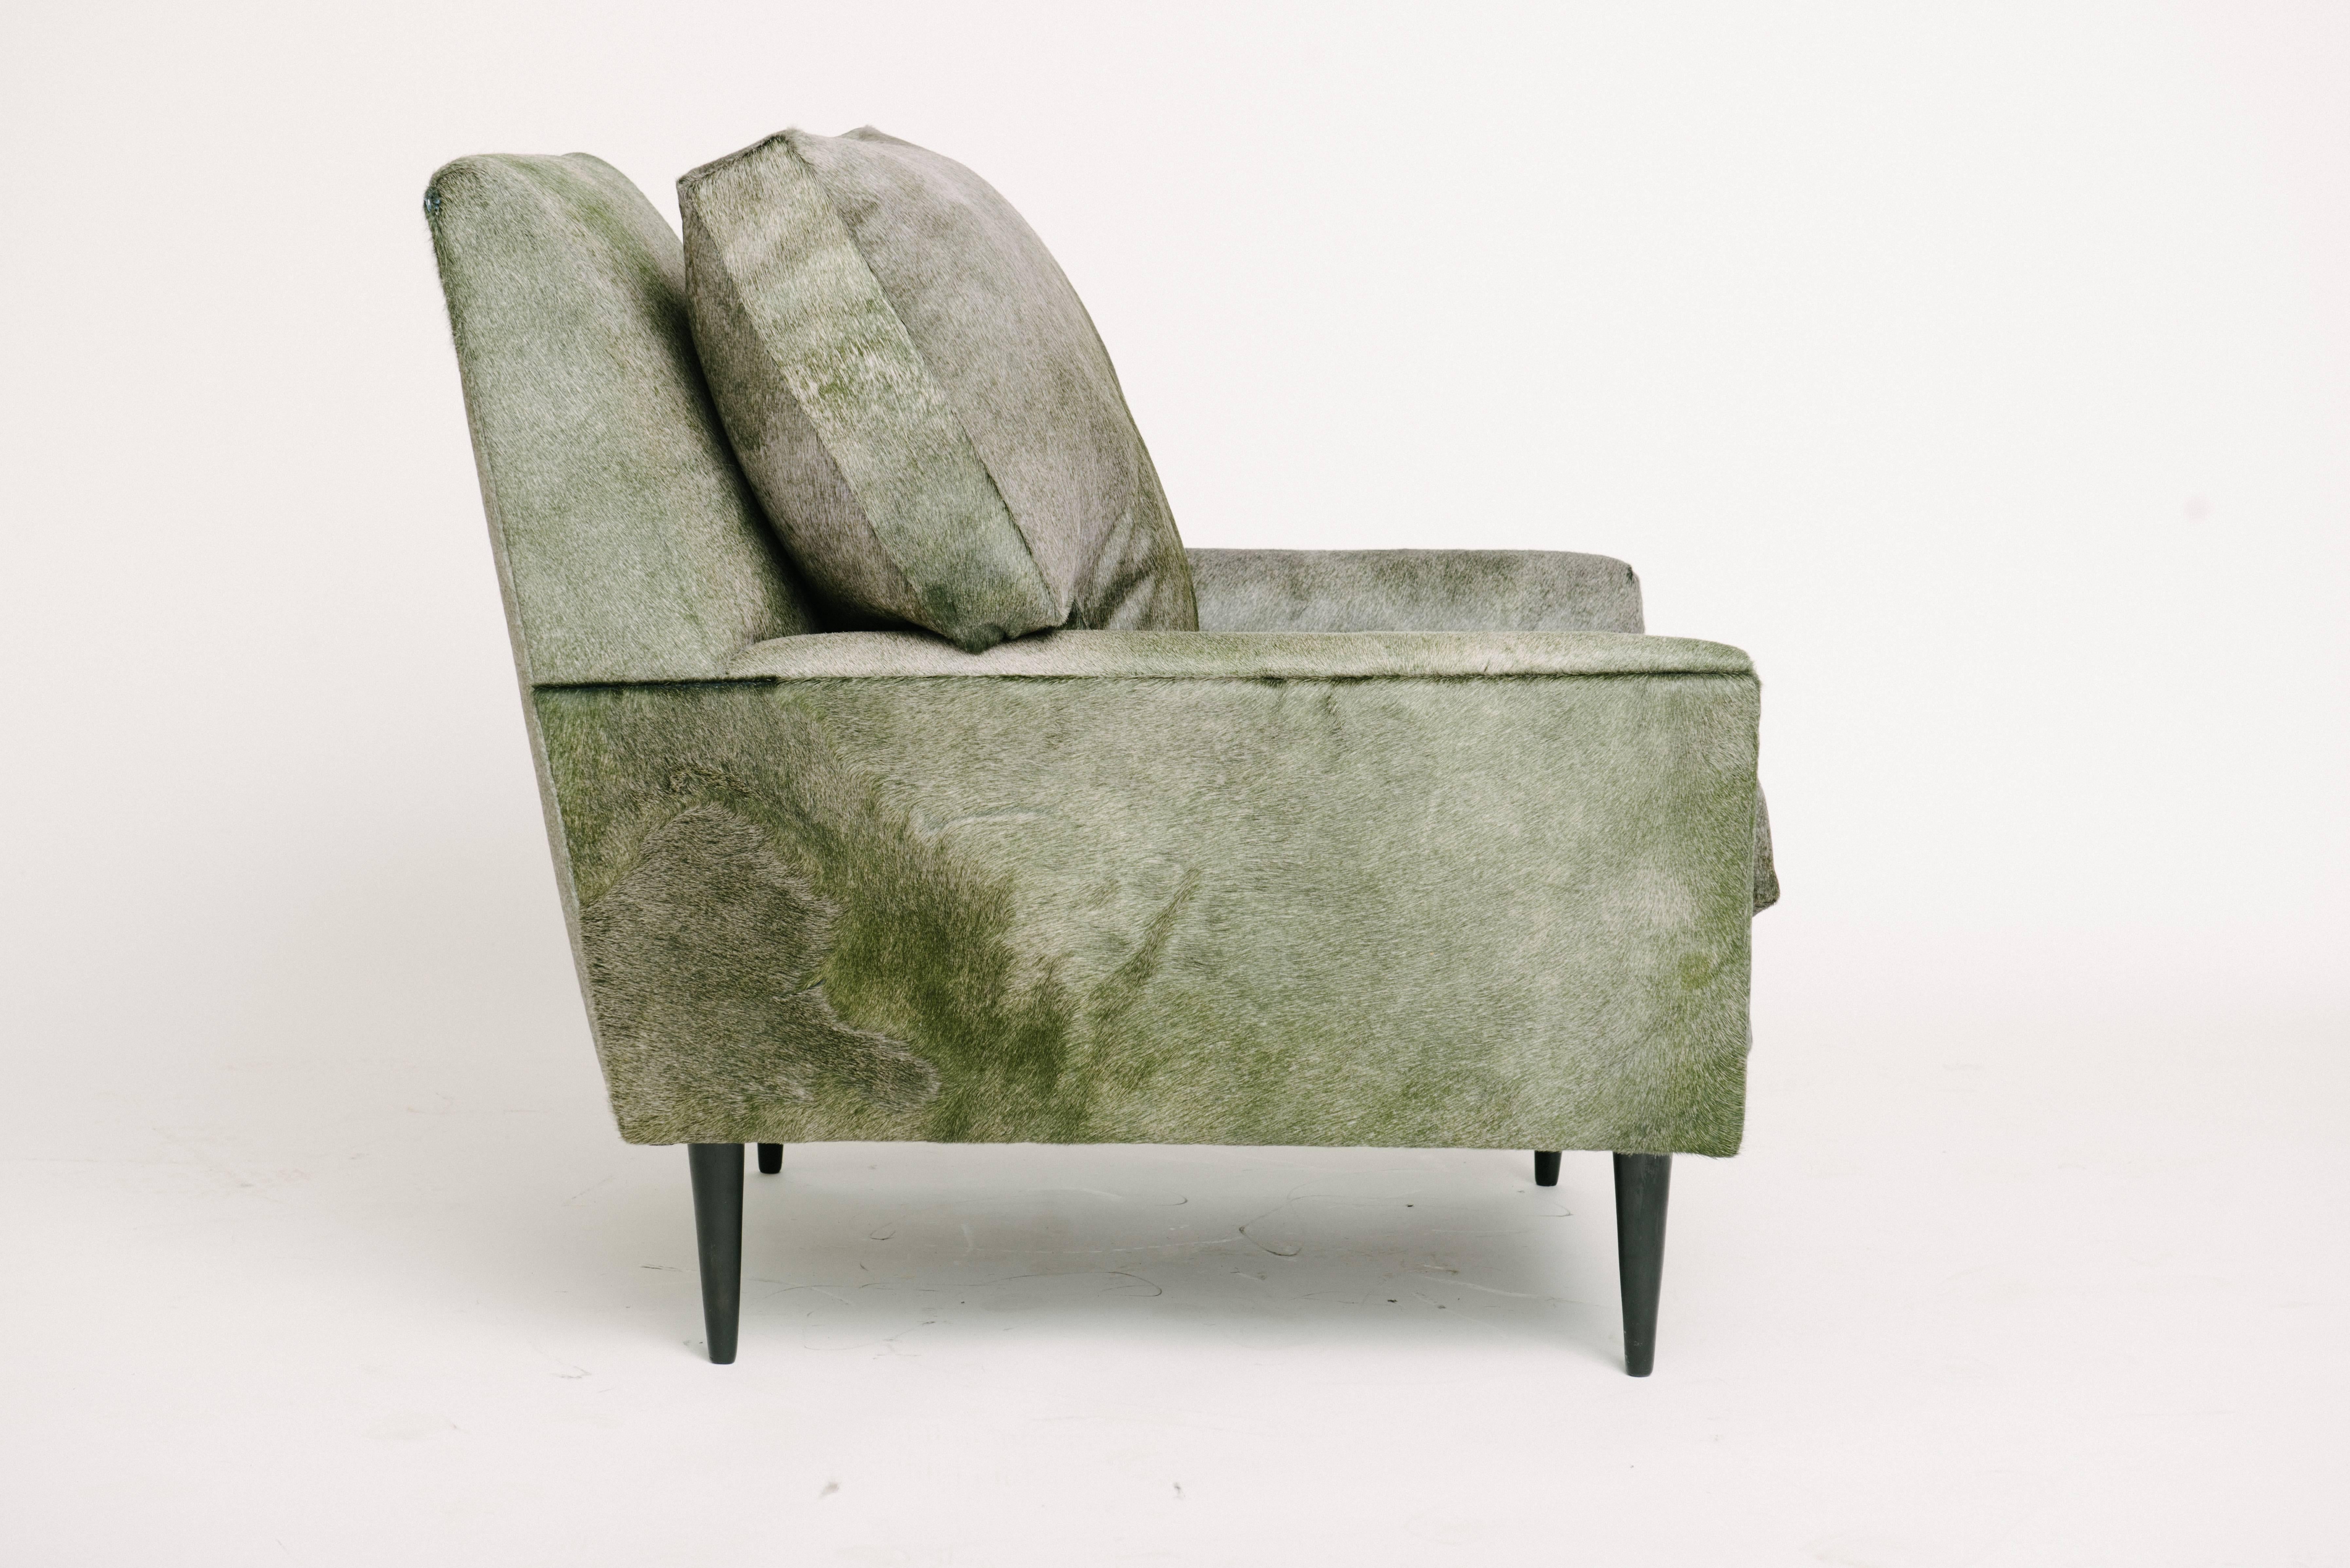 Chair and ottoman by Milo Baughman for Thayer Coggin. Newly upholstered in an acid dyed Italian hair hide.

Chair: 30in W, 36in D, 33in H, 18.75in SH.
Ottoman: 25in W, 25in D, 18in H.

Overall length of chair and ottoman pushed together is 62